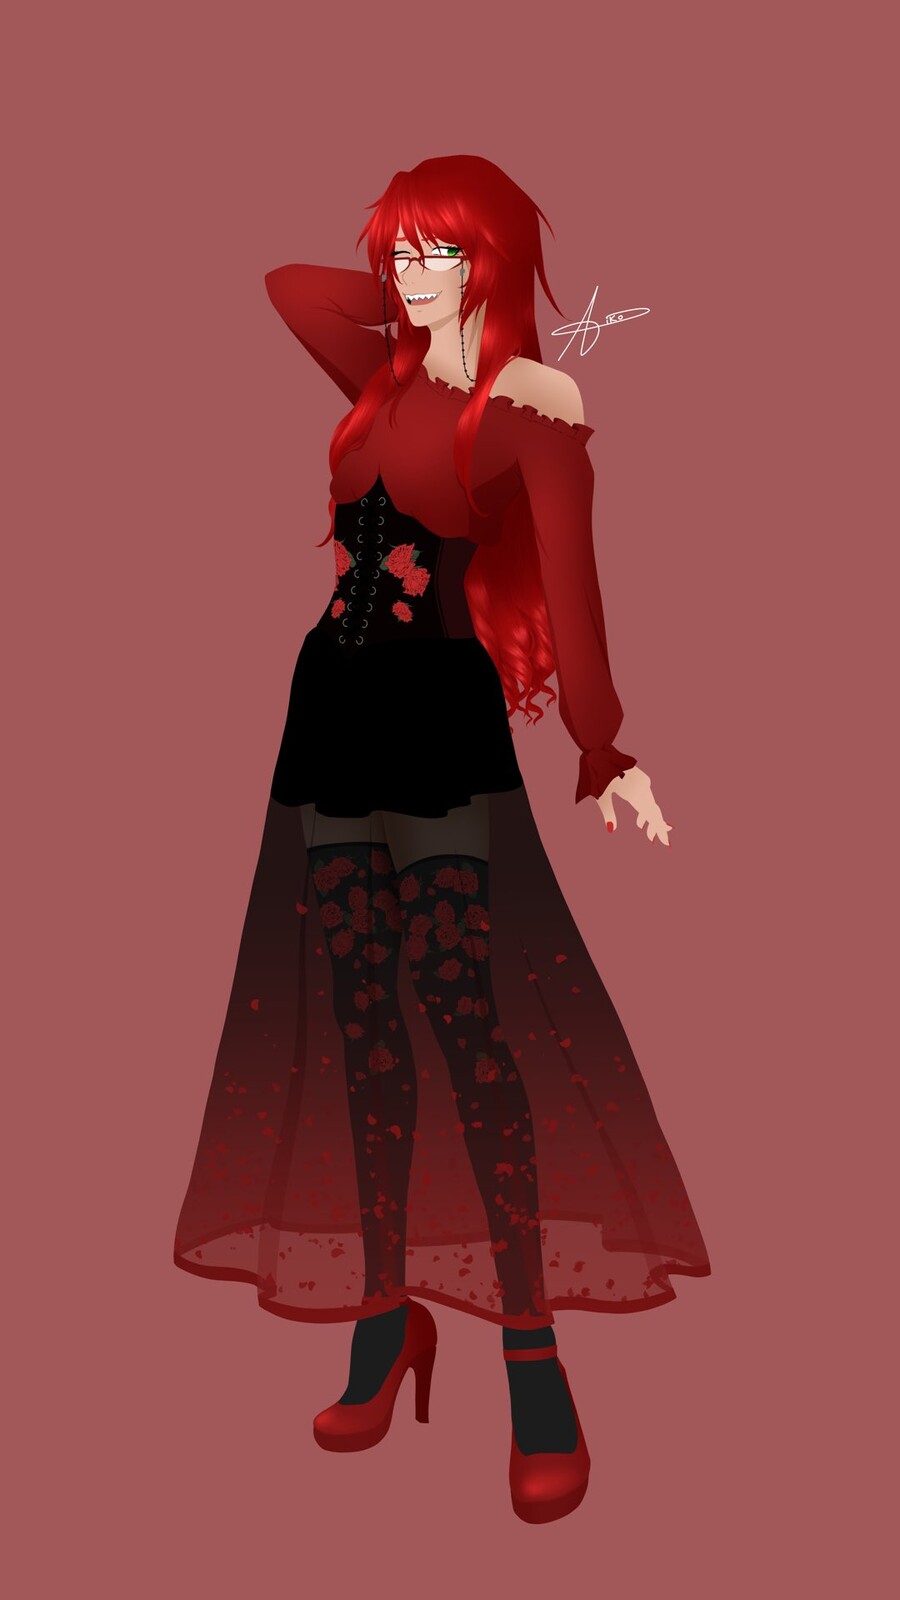 Grell Sutcliff fanart
“New outfit”